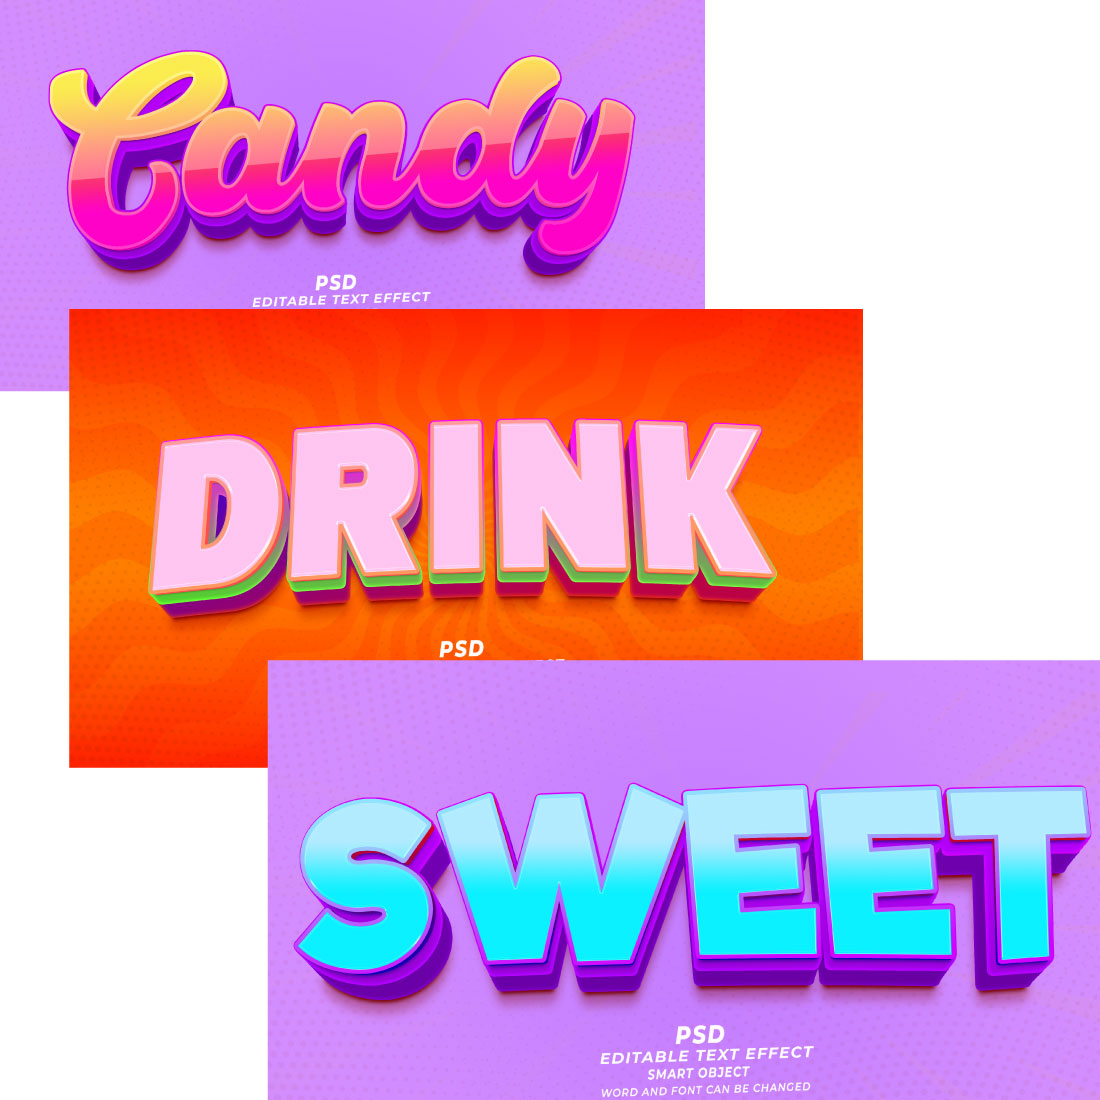 Sweet and fruit PSD bundle 3D editable text effect preview image.